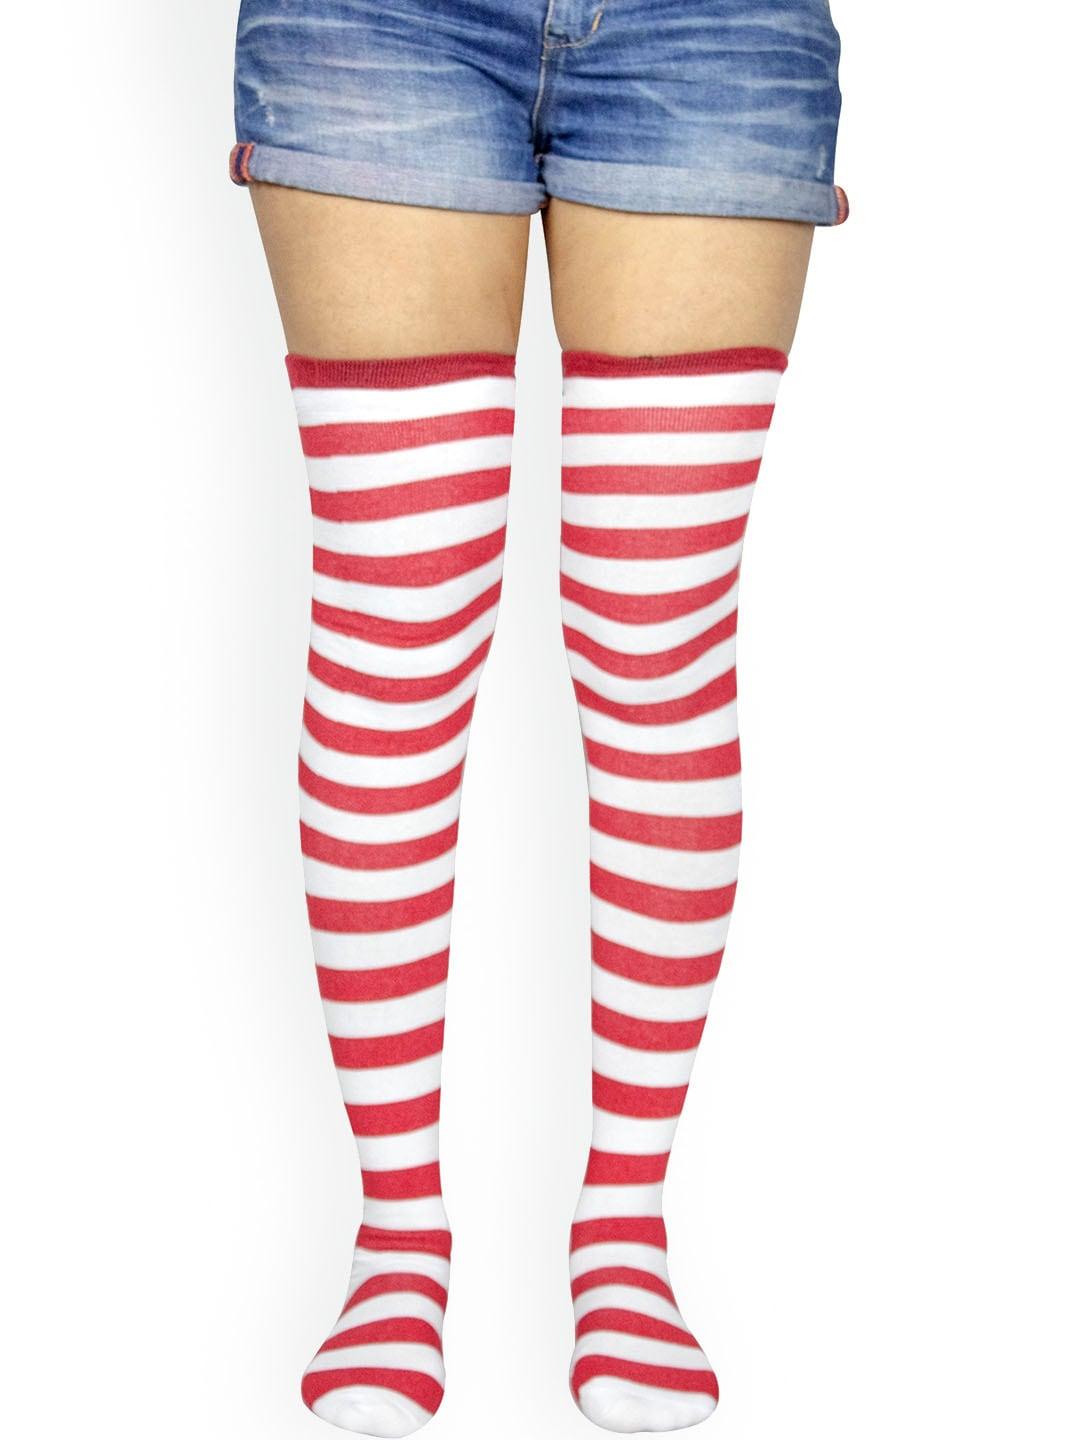 baesd striped cotton thigh-high stockings